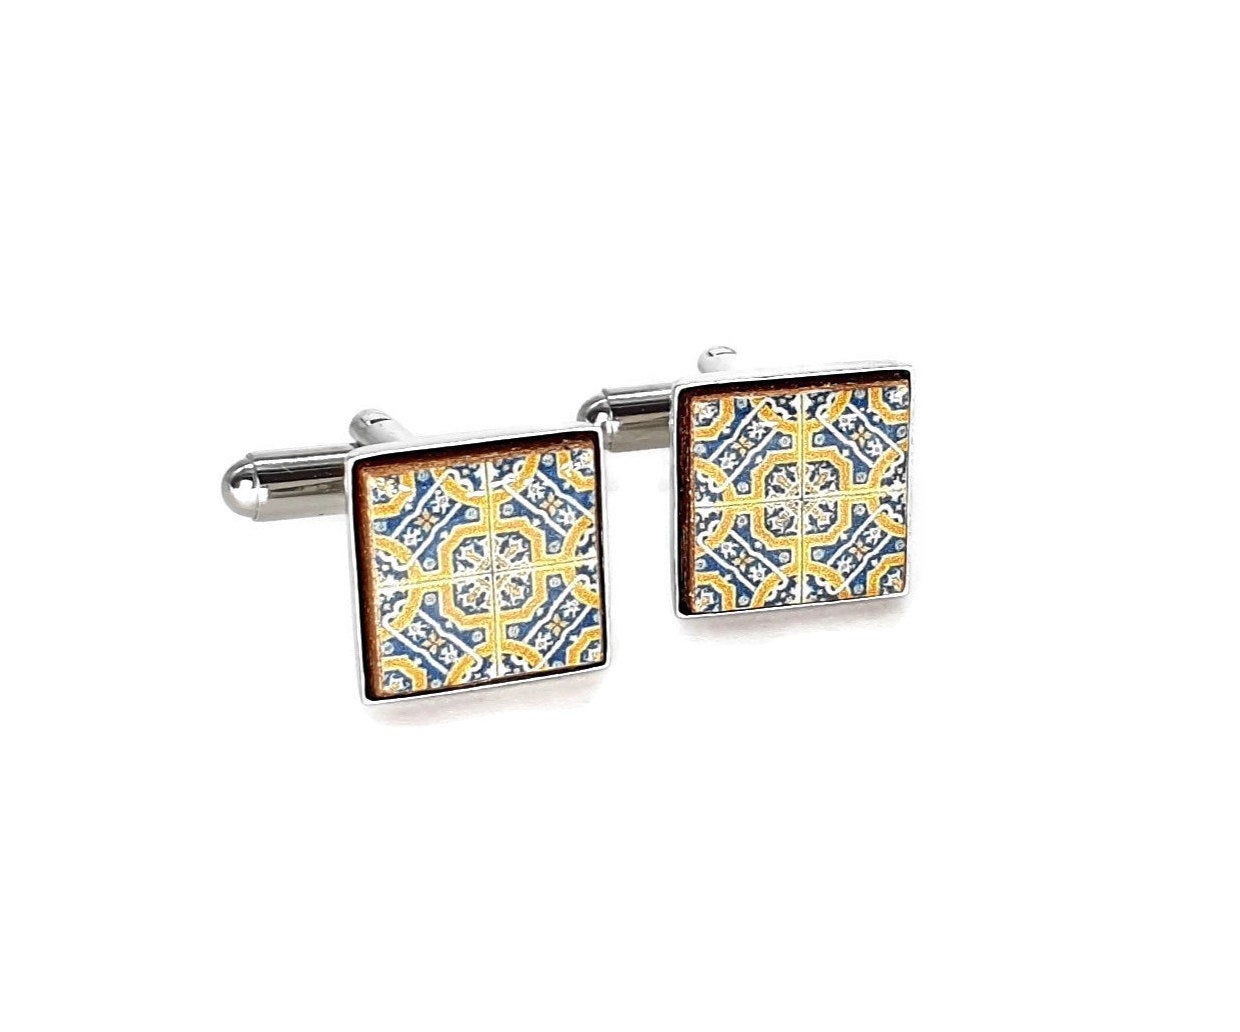 Small Portuguese Tiles Cuff links, Yellow and blue antique tiles, corporate gift, suit men accessories, square silver cuff links, Portugal - ineslamy